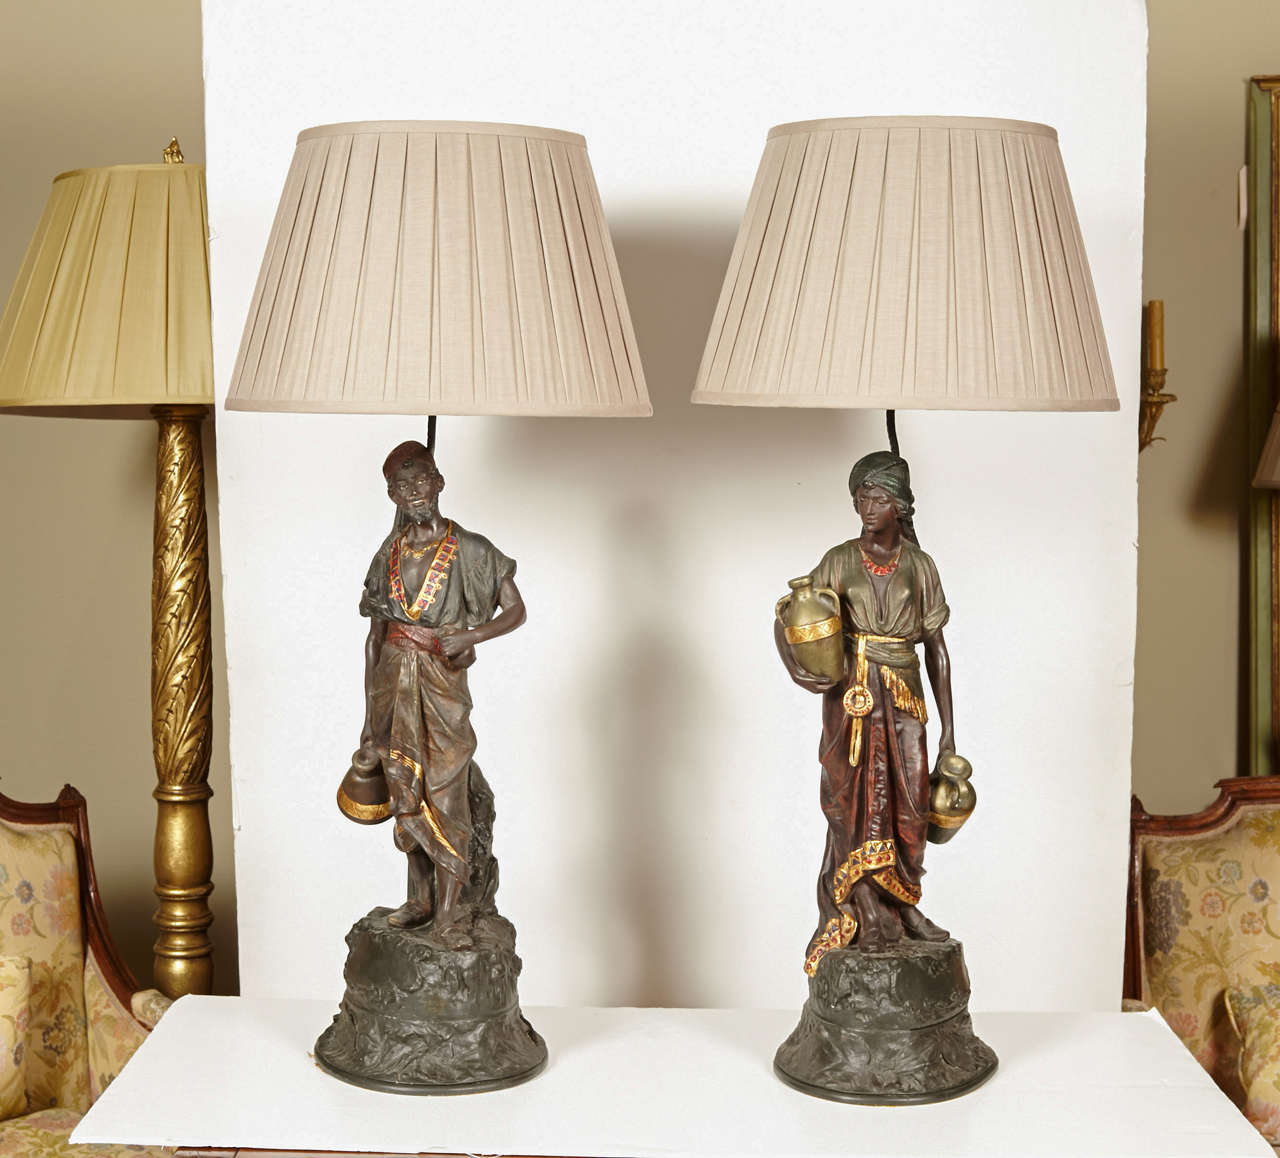 Pair of 19th century signed Italian Orientalist hand painted Arabic male and female figural lamps.